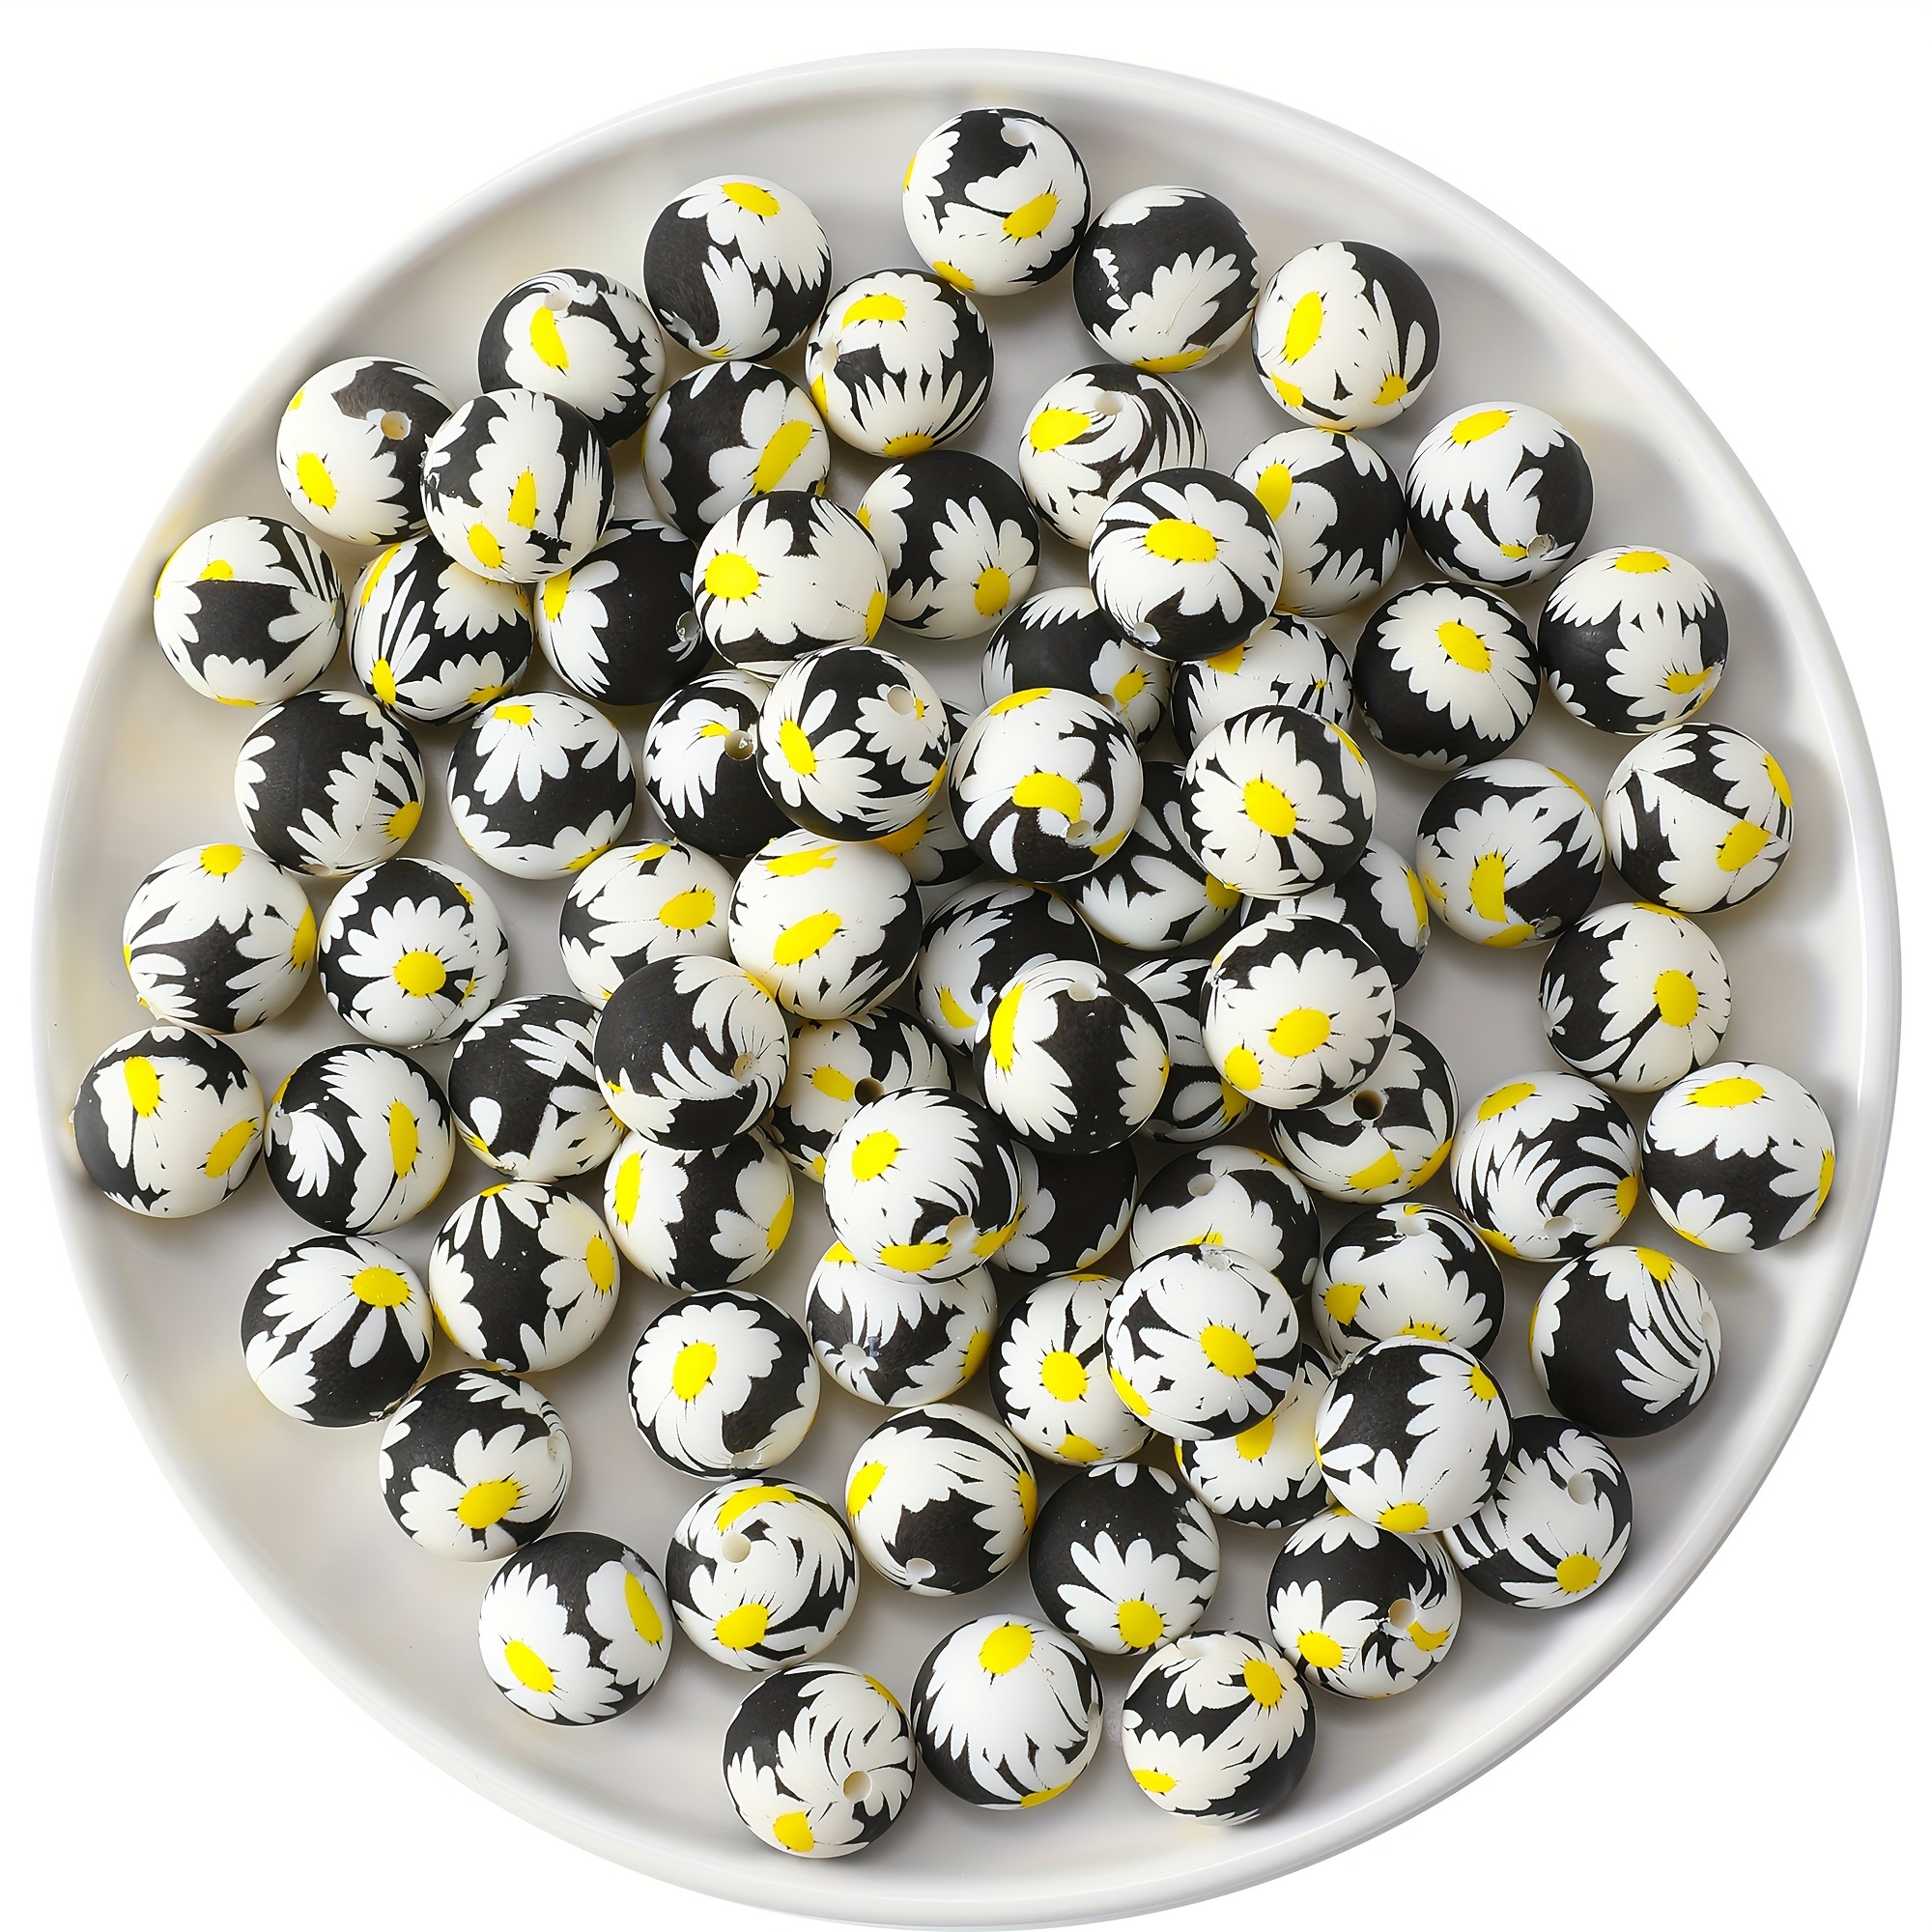 

50pcs Silicone Printed Beads Black White Sunflower Print Beads 15mm Printed Beads Silicone Spacer Beads For Keychain Making Bracelet Necklace Diy Pen Beads